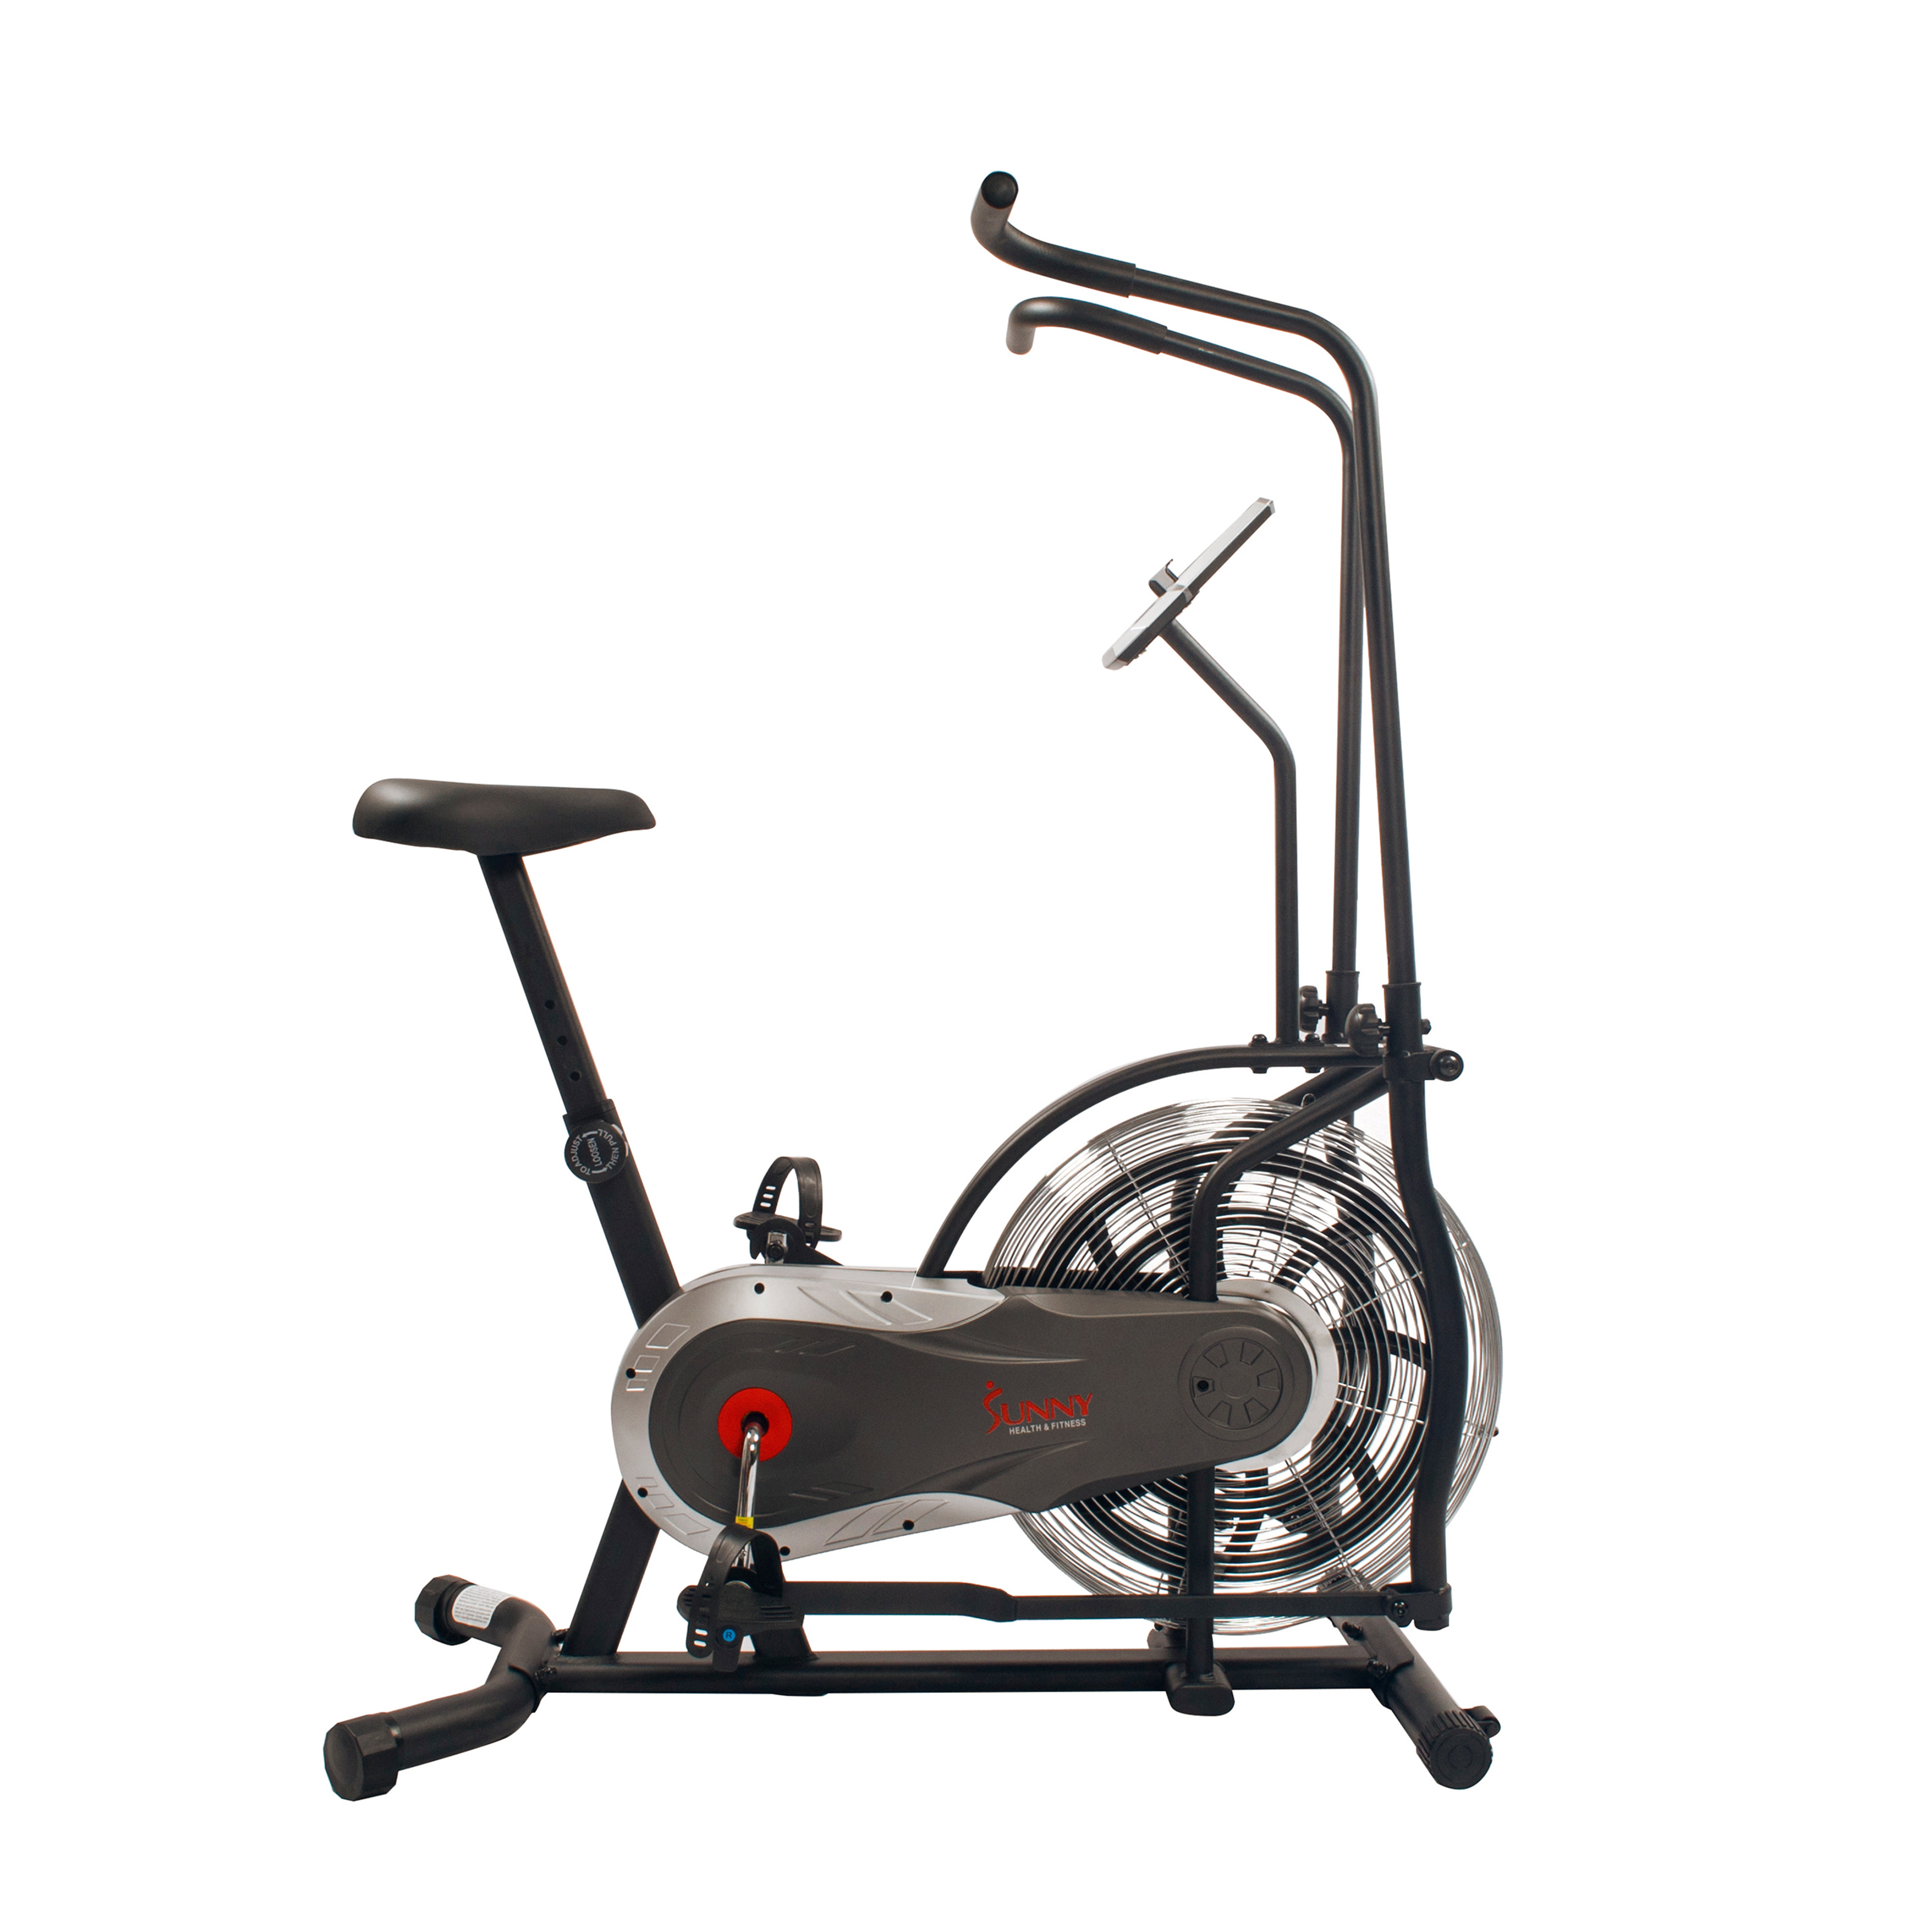 Sunny Health & Fitness Zephyr Air Bike, Fan Exercise Bike with Unlimited Resistance, Adjustable Handlebars - SF-B2715 - image 1 of 8